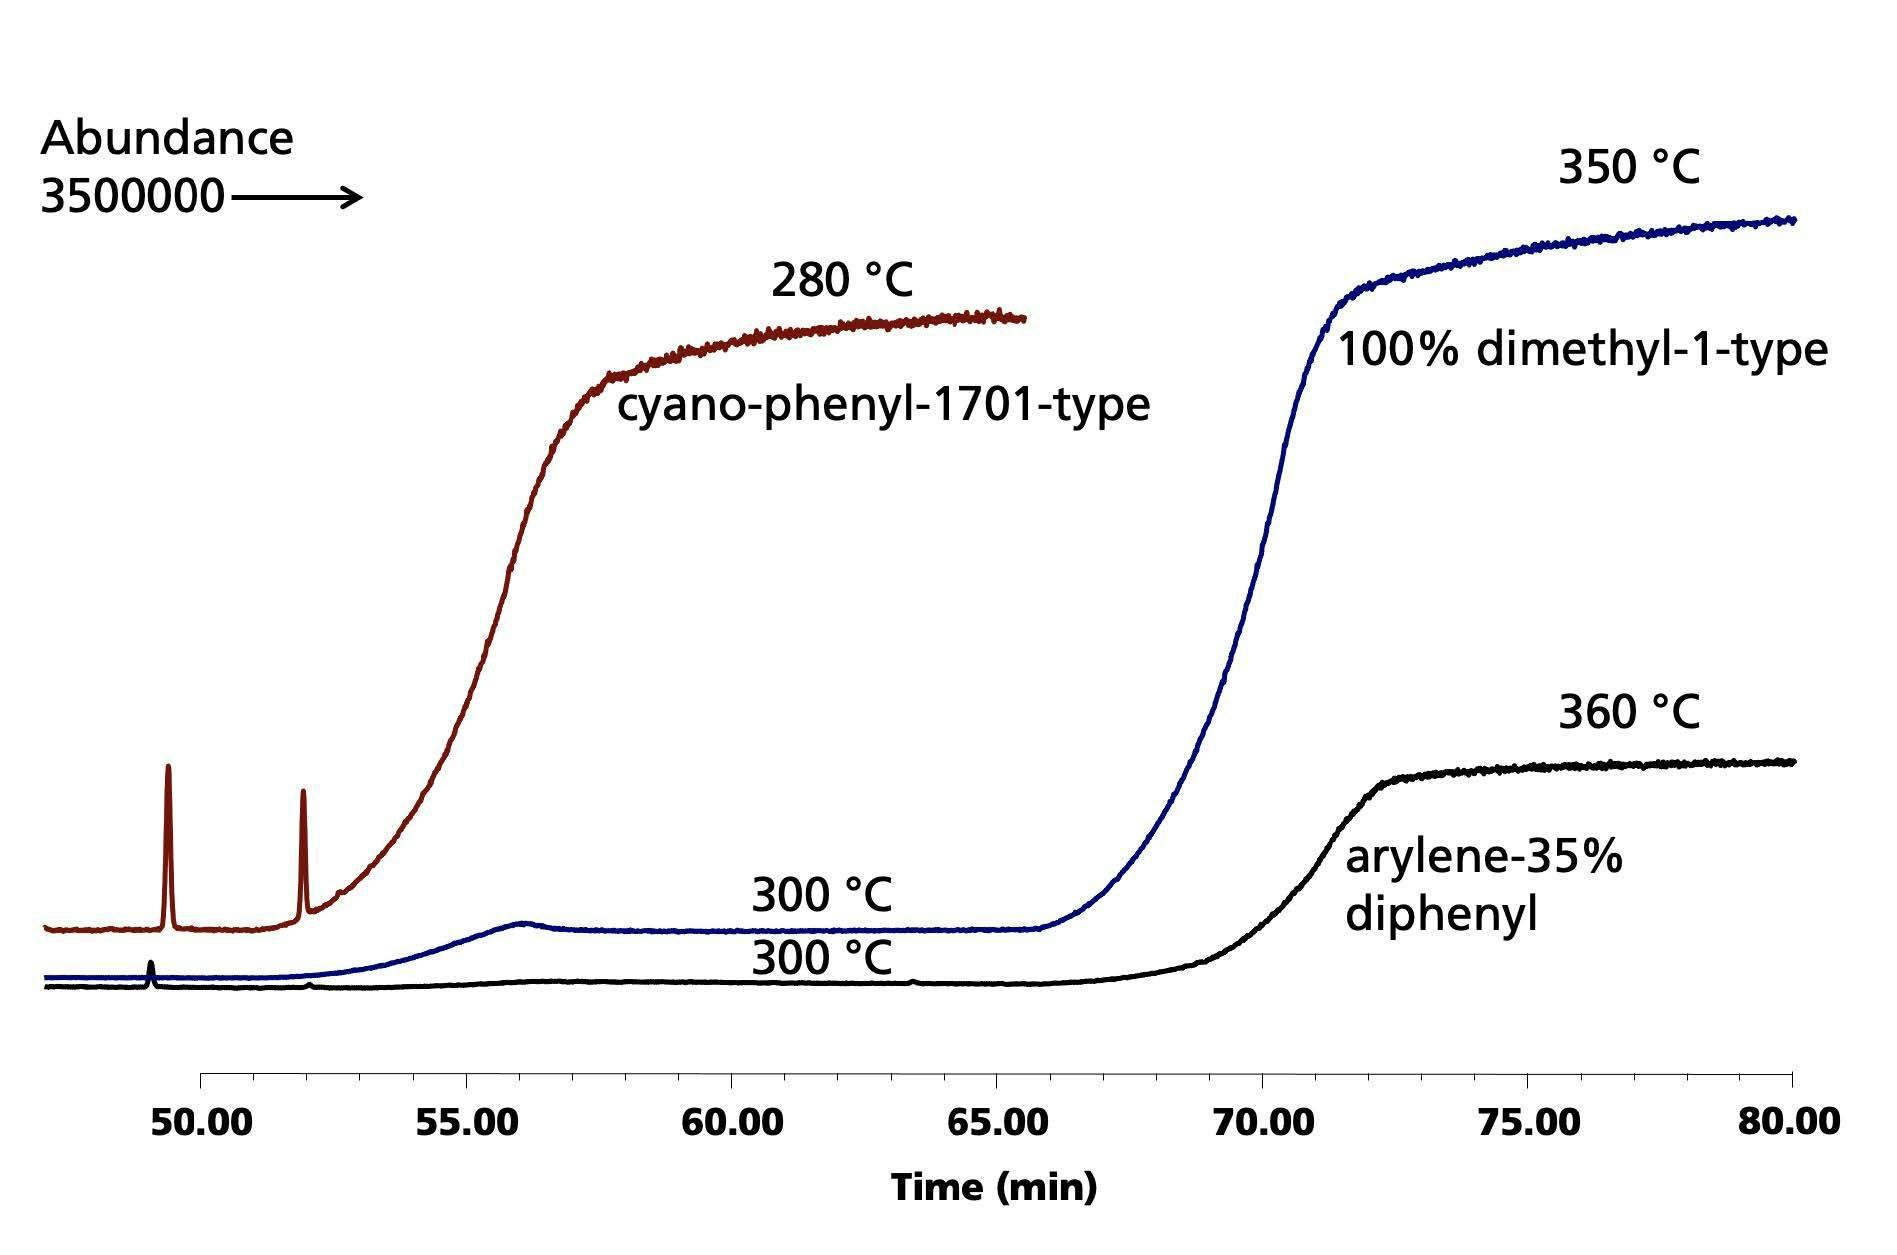 Figure 4: Overlay of total ion chromatograms (TICs) comparing three different stationary phases operated at their maximum temperatures with an air leak for a total of 180 min. “1-Type” (blue trace), “1701-Type” (red trace), and an arylene-35% diphenyl (black trace) columns were tested. The arylene-35% diphenyl phase was most resistant to oxidative breakdown.